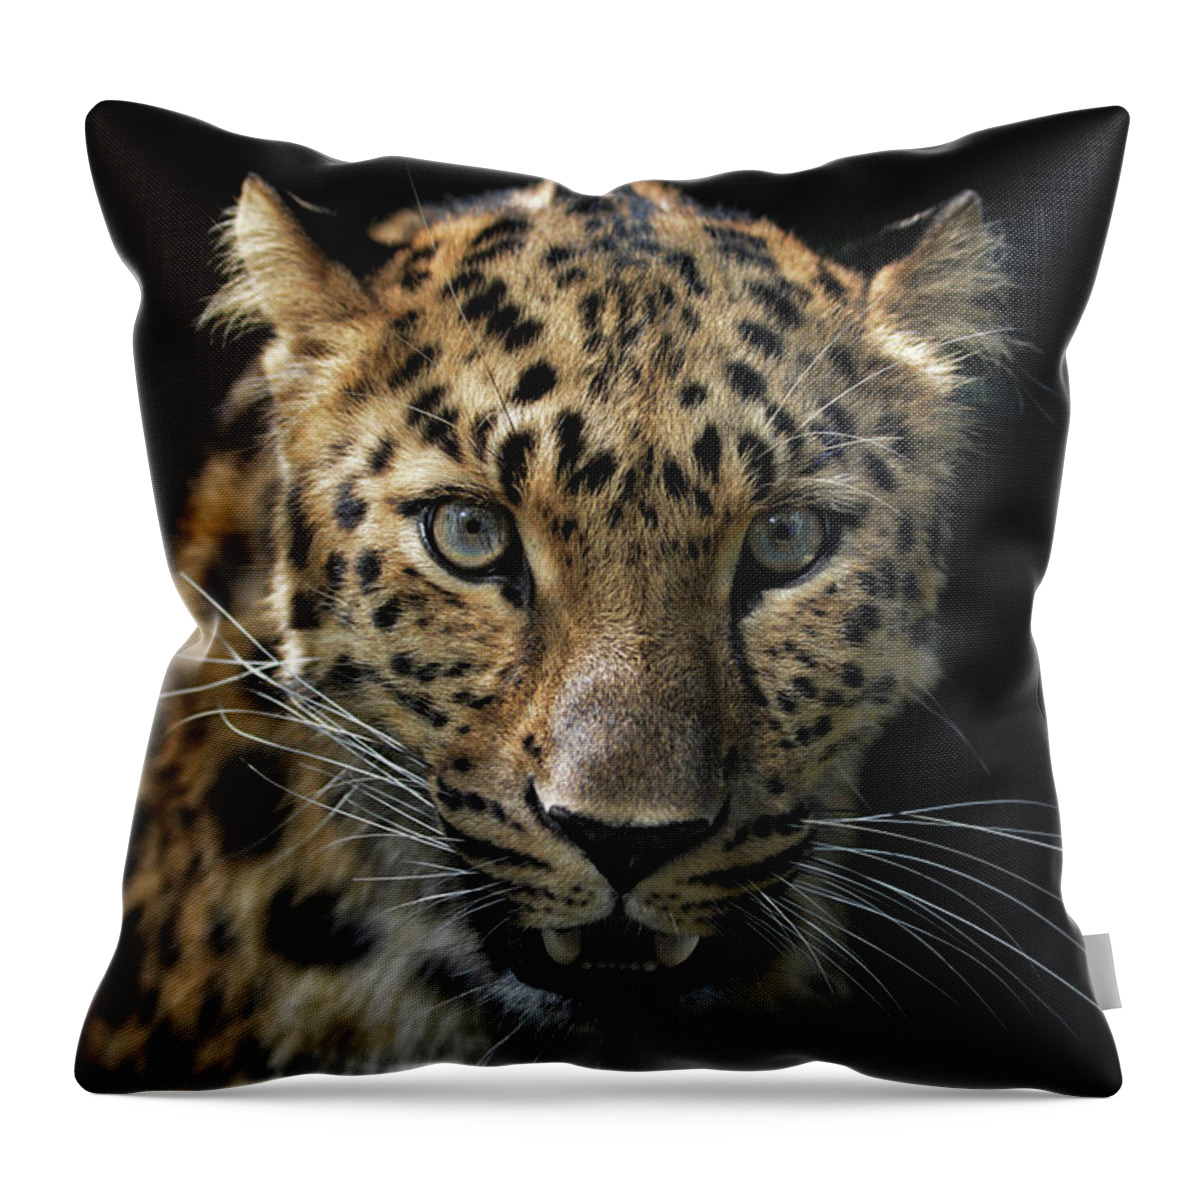 Portrait Throw Pillow featuring the photograph Face To Face With The Panther by Joachim G Pinkawa